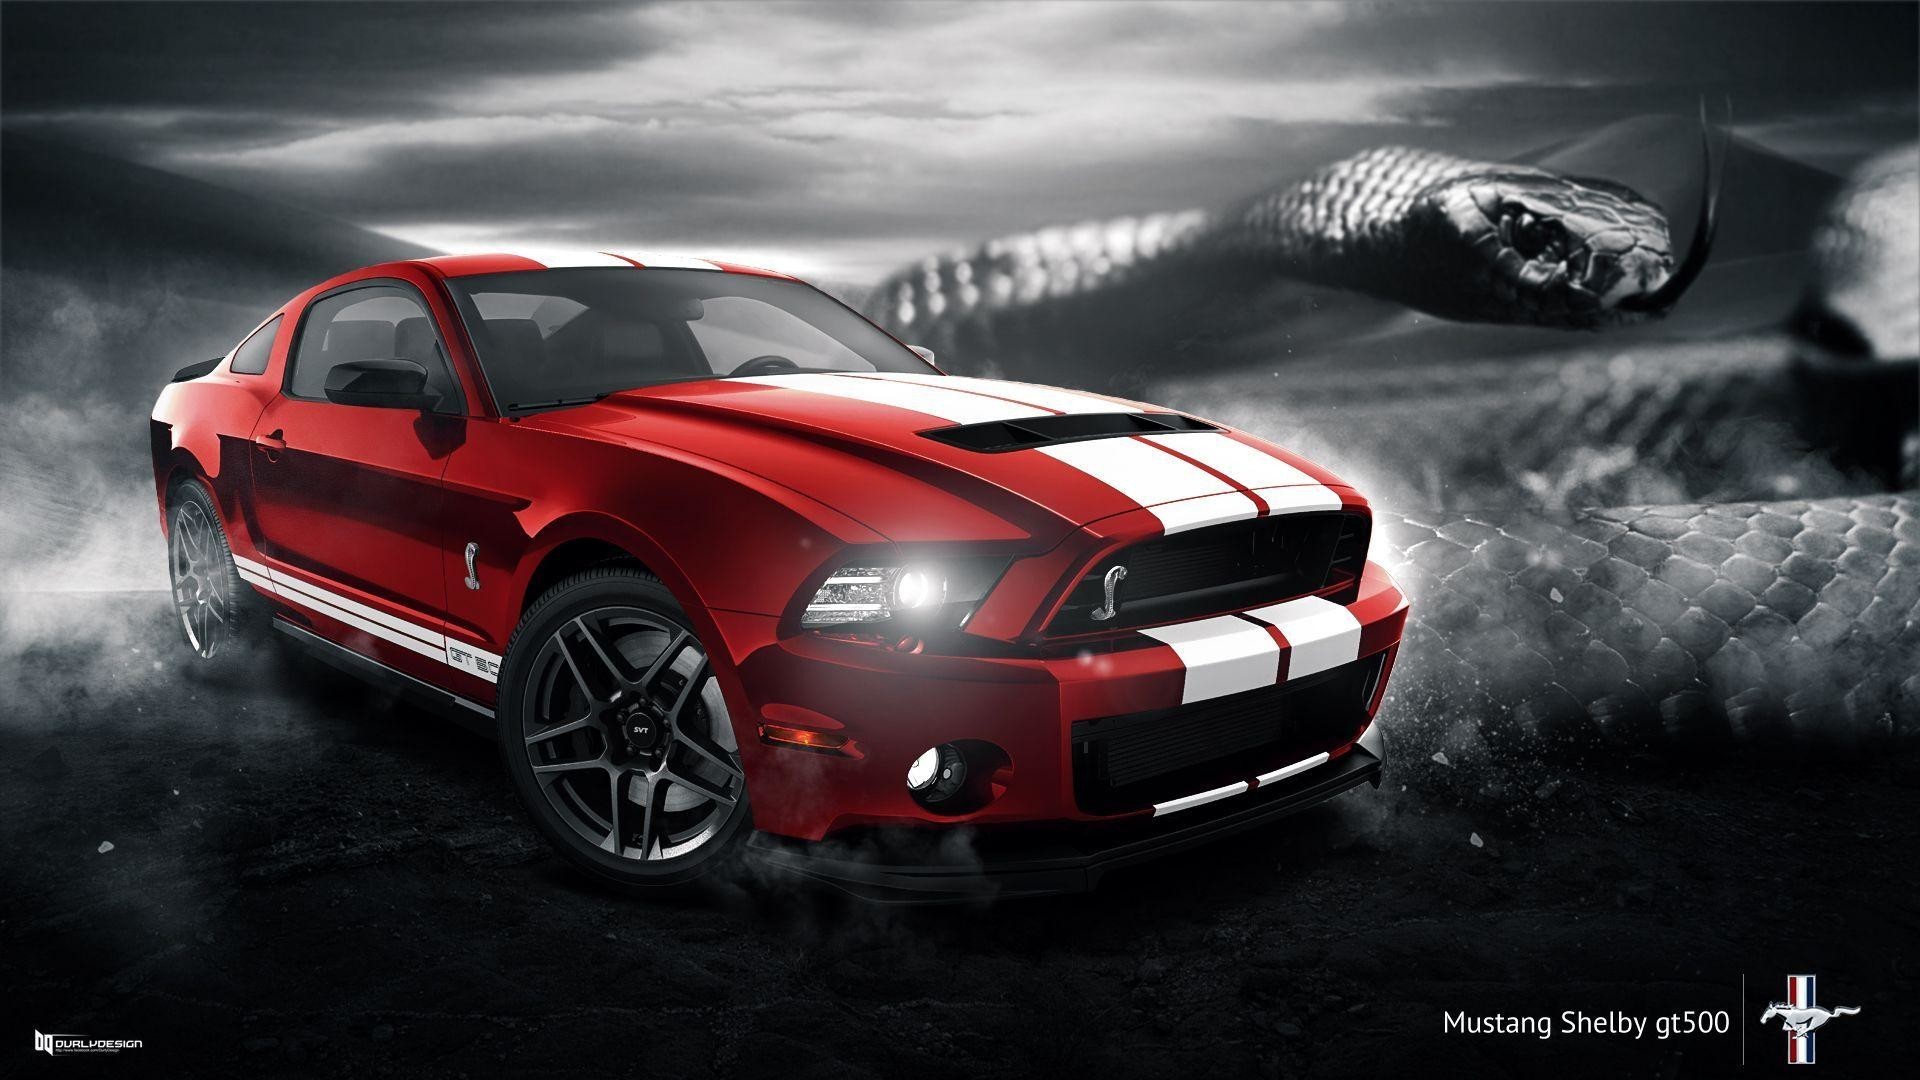 1920x1080 1920x1440 Shelby Gt500 picture: 2018 shelby gt500 design jpg  (carsintrend.com) Shelby Gt500 picture: 2018 Ford Mustang Shelby GT500  (carslane.com)